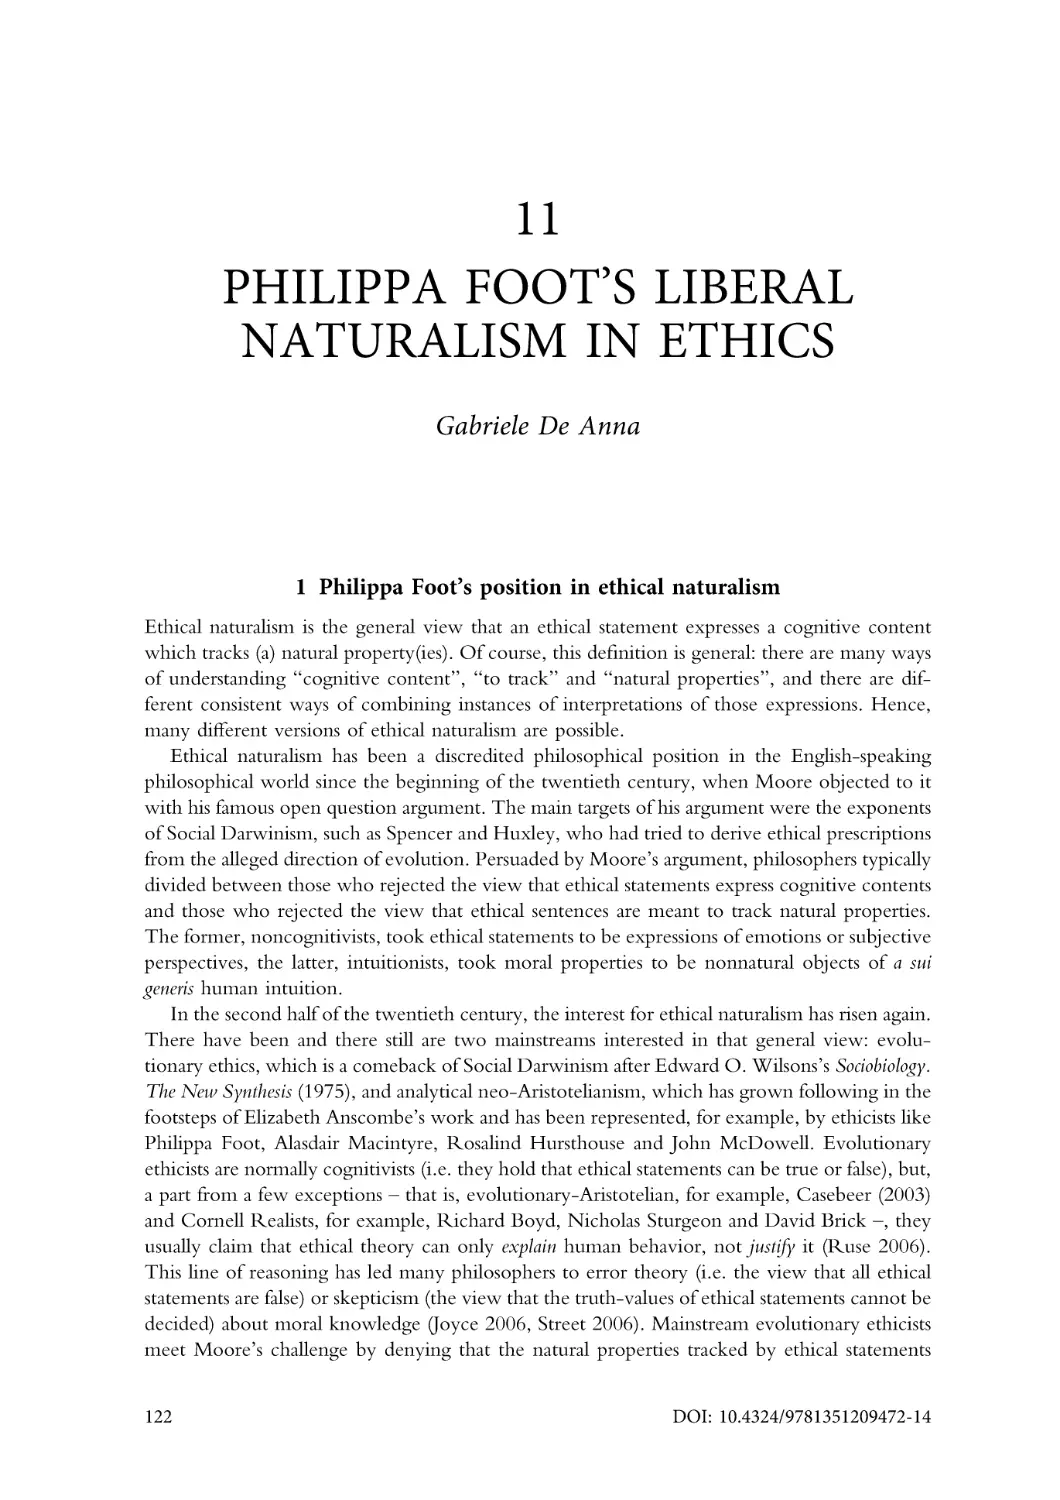 11. Philippa Foot's liberal naturalism in ethics
1. Philippa Foot's position in ethical naturalism